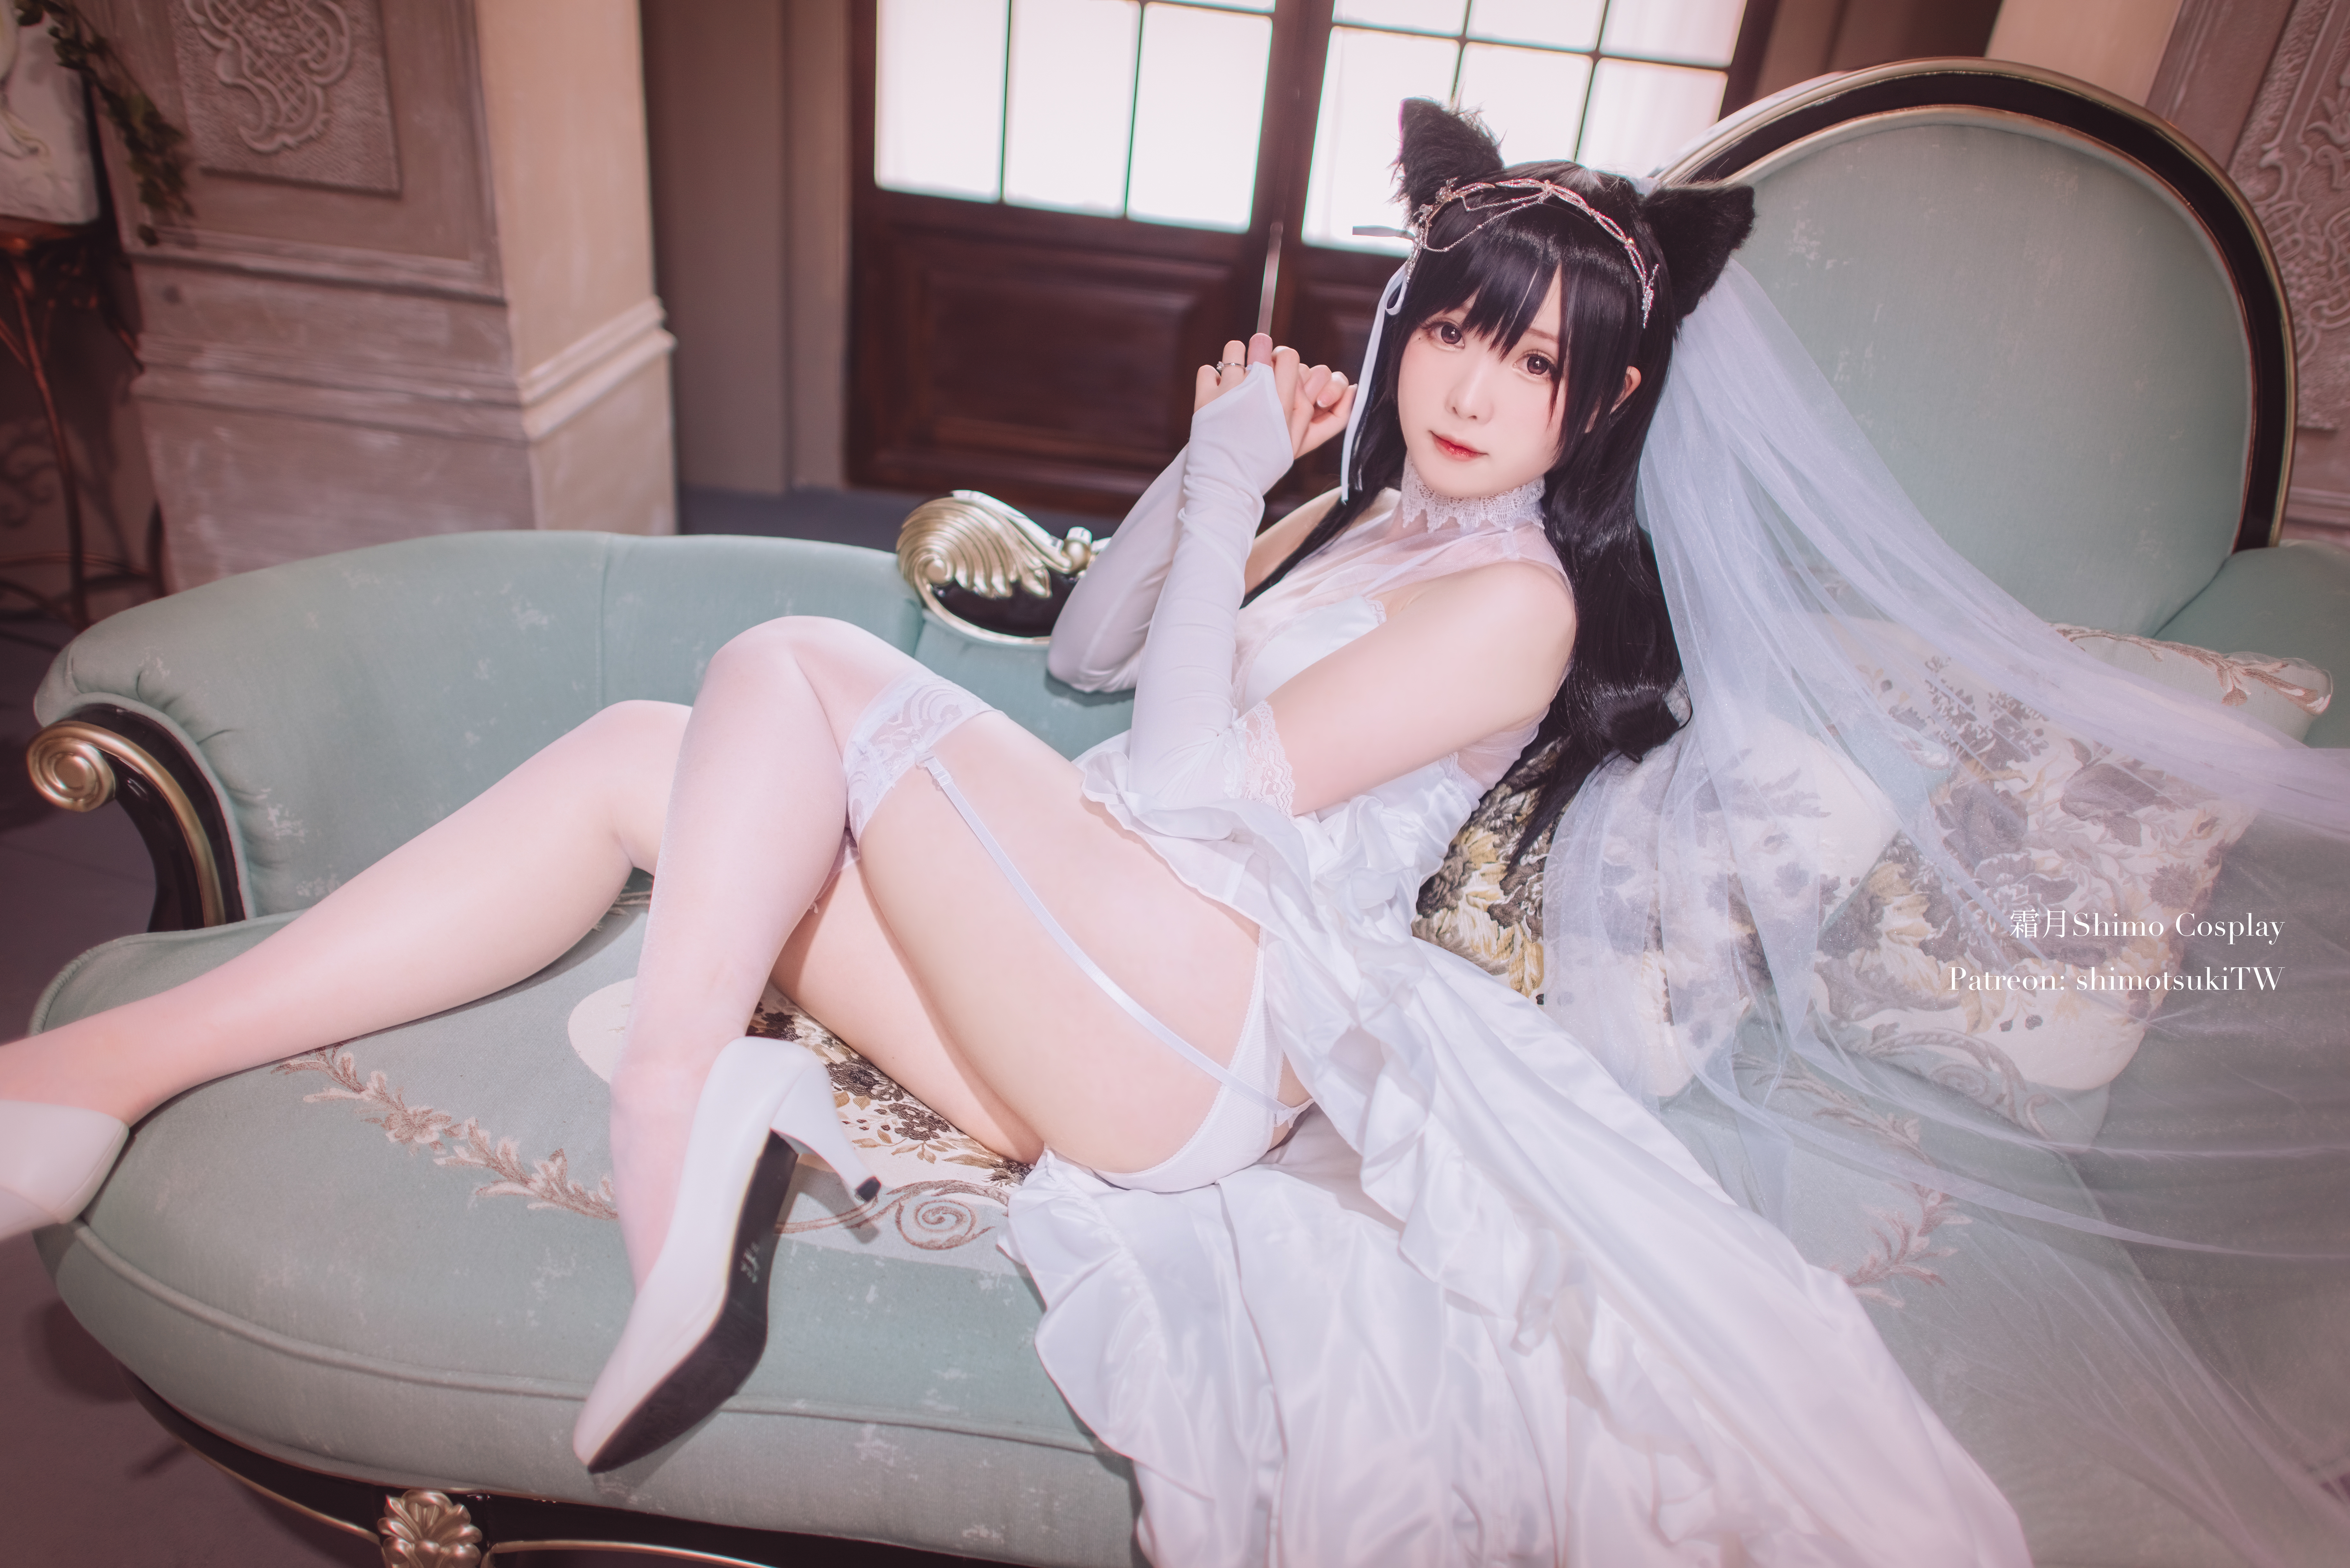 People 7360x4912 women model brunette Asian cosplay brides wedding dress dress white dress white clothing lingerie white lingerie garter straps stockings white stockings veils panties white panties high heels thighs ass looking at viewer indoors women indoors Shimo Cosplay